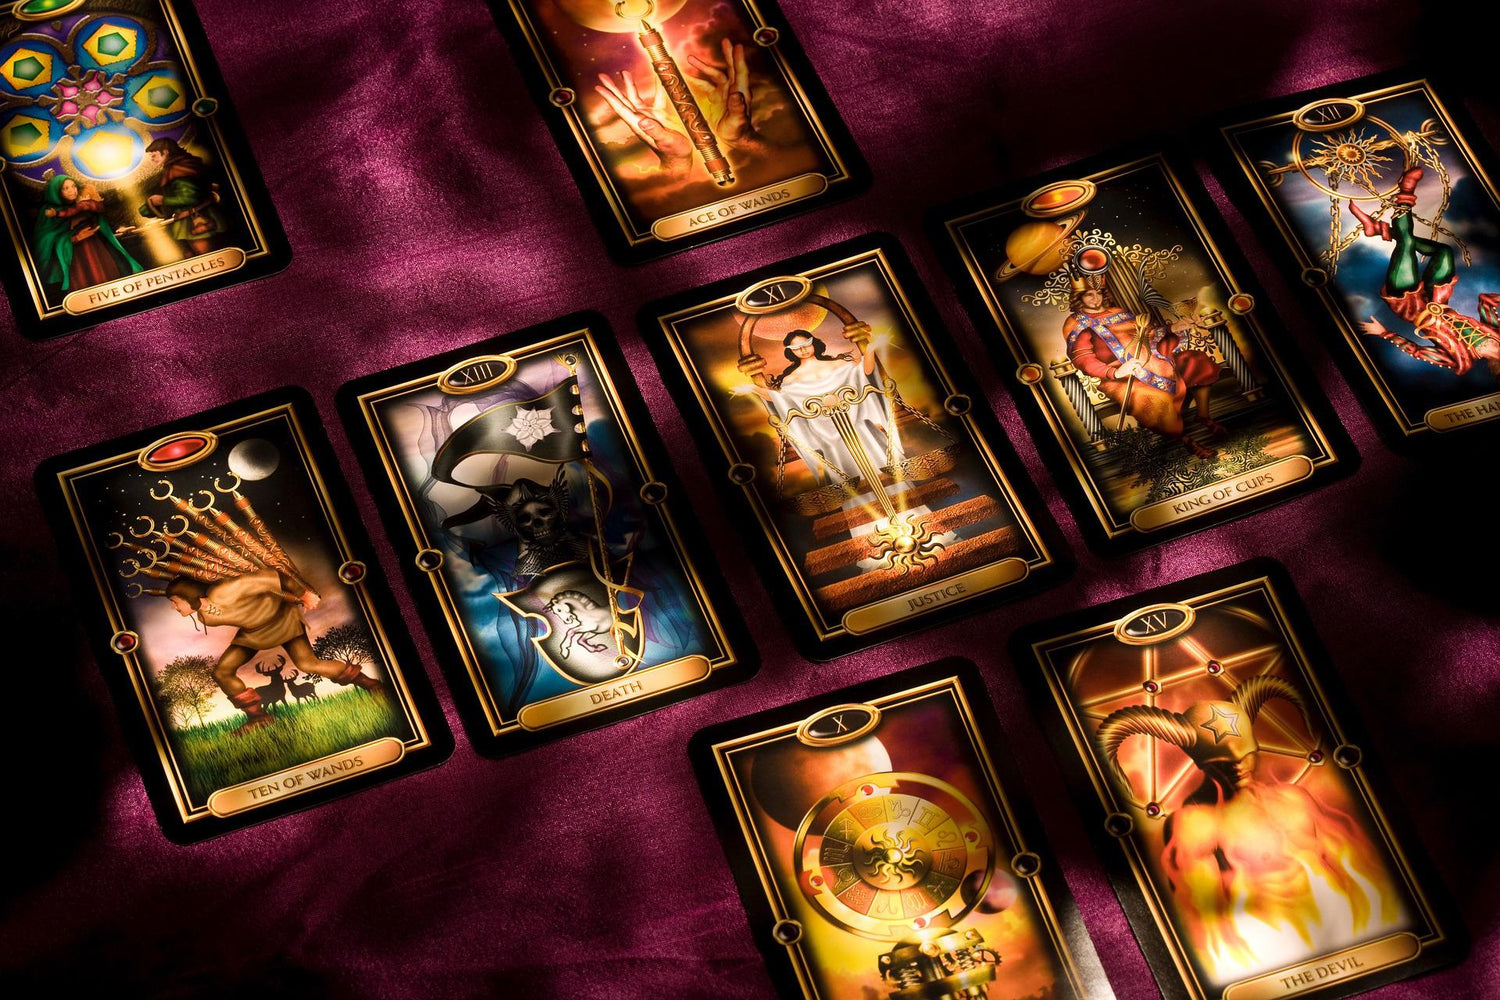 Tarot cards and oracle cards